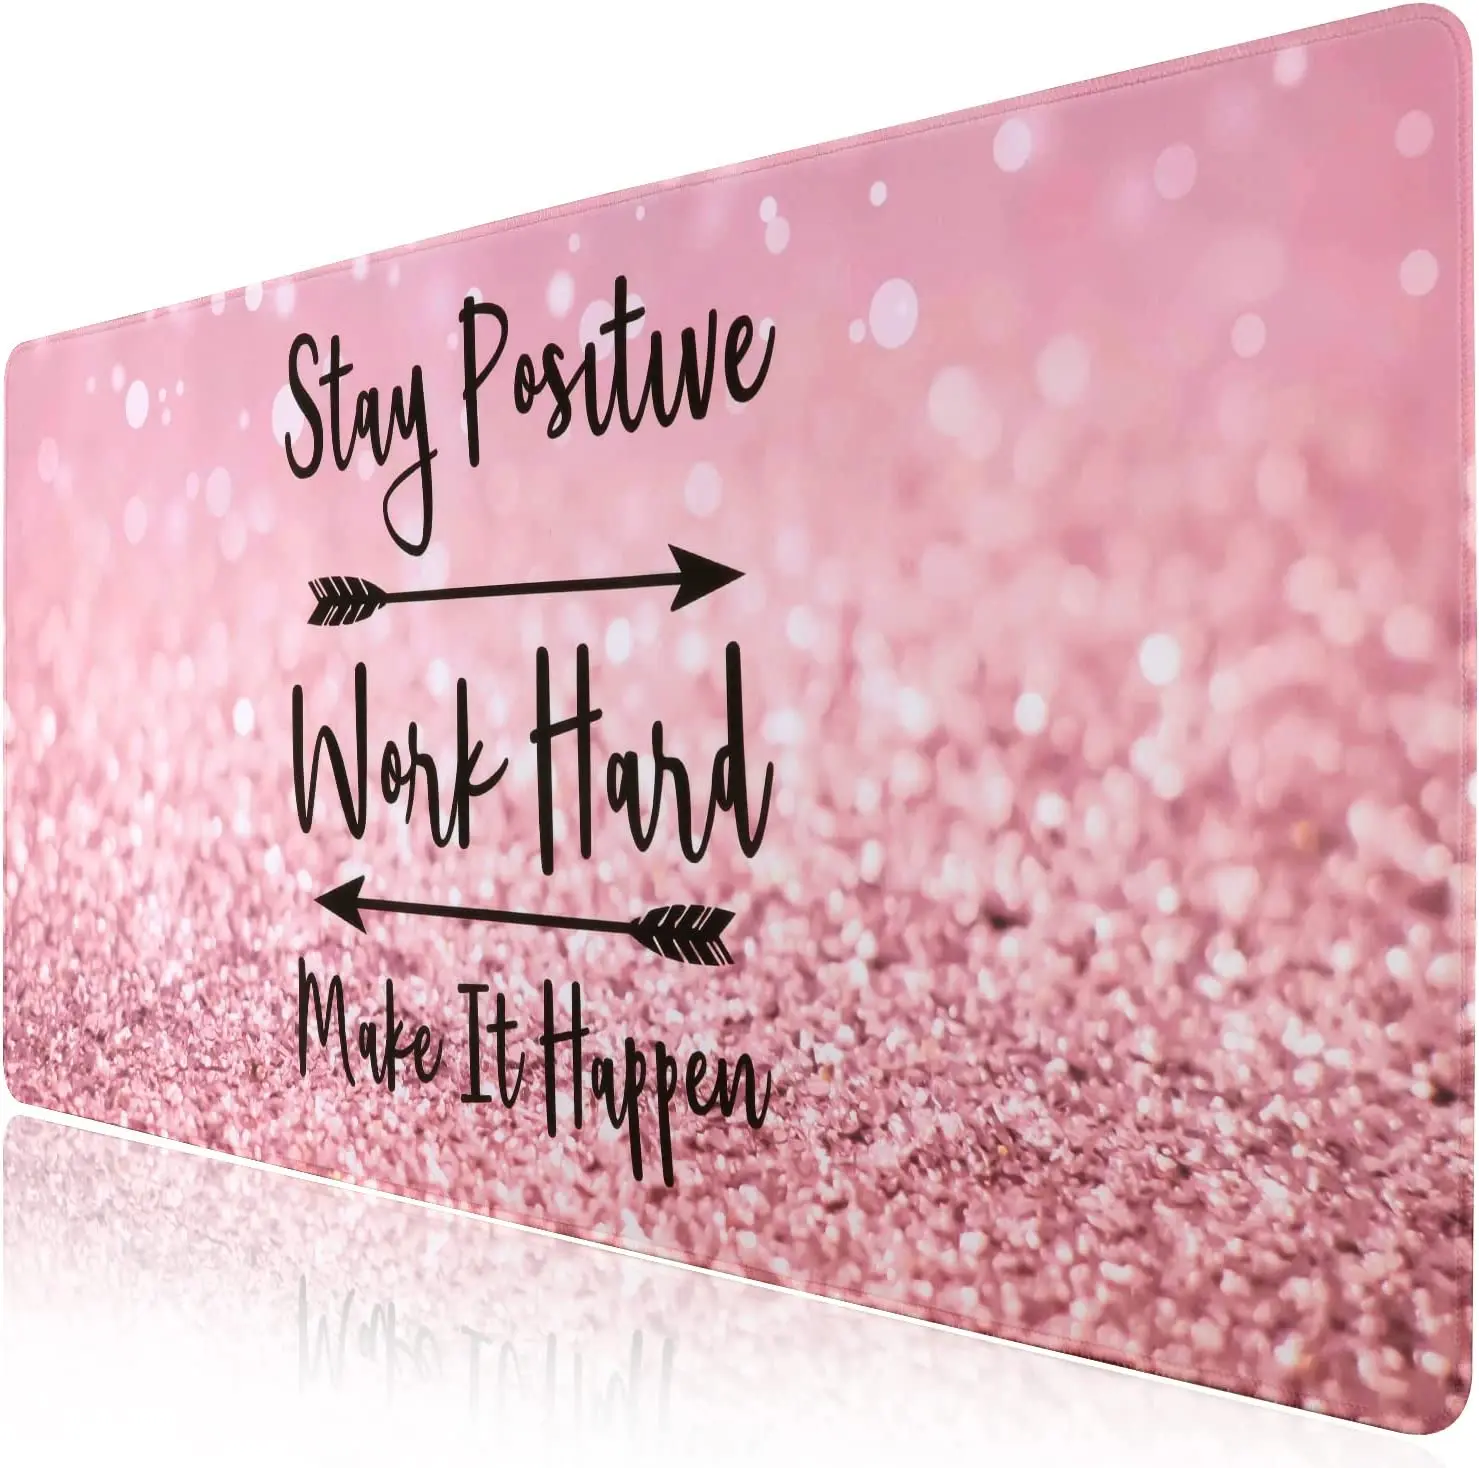 

Extended Mouse Pad 35.4x15.7 in Large 3mm Non-Slip Rubber Base Mousepad with Stitched Edges Waterproof Desk Pad Stay Positive